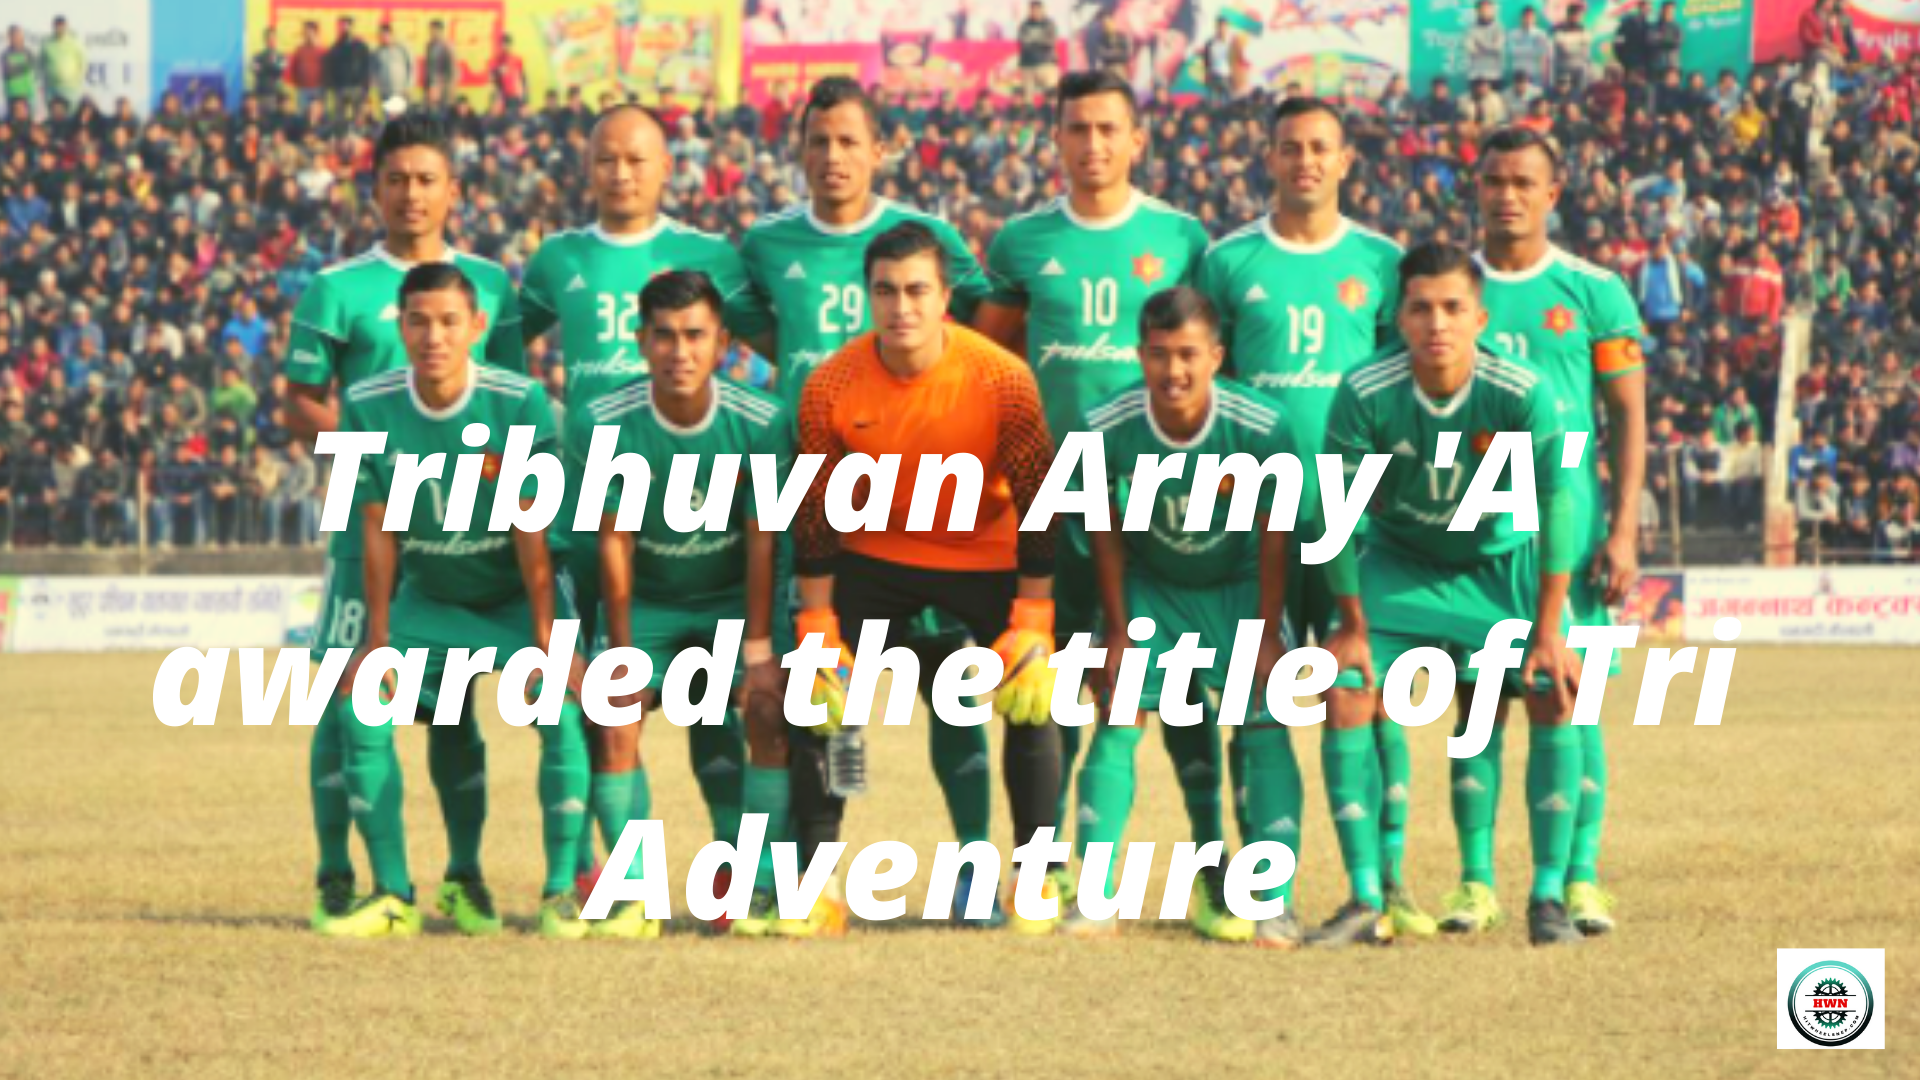 Tribhuvan Army ‘A’ awarded the title of Tri Adventure